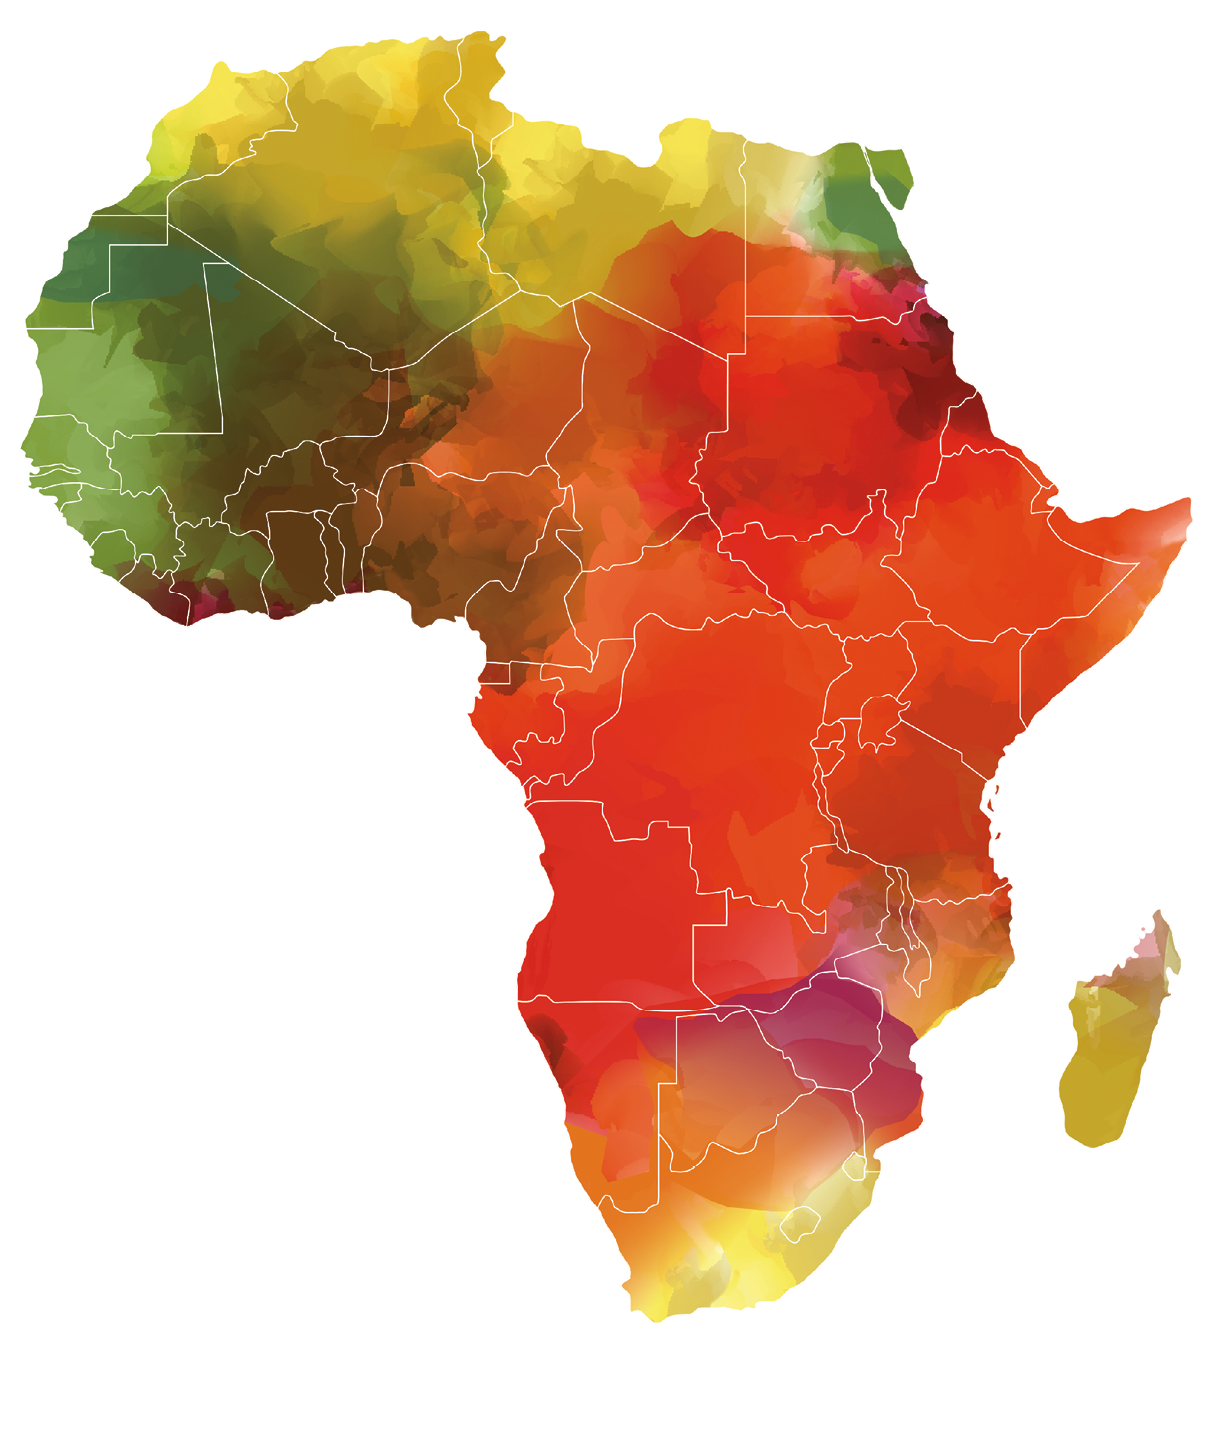 Watercolor Map of Africa